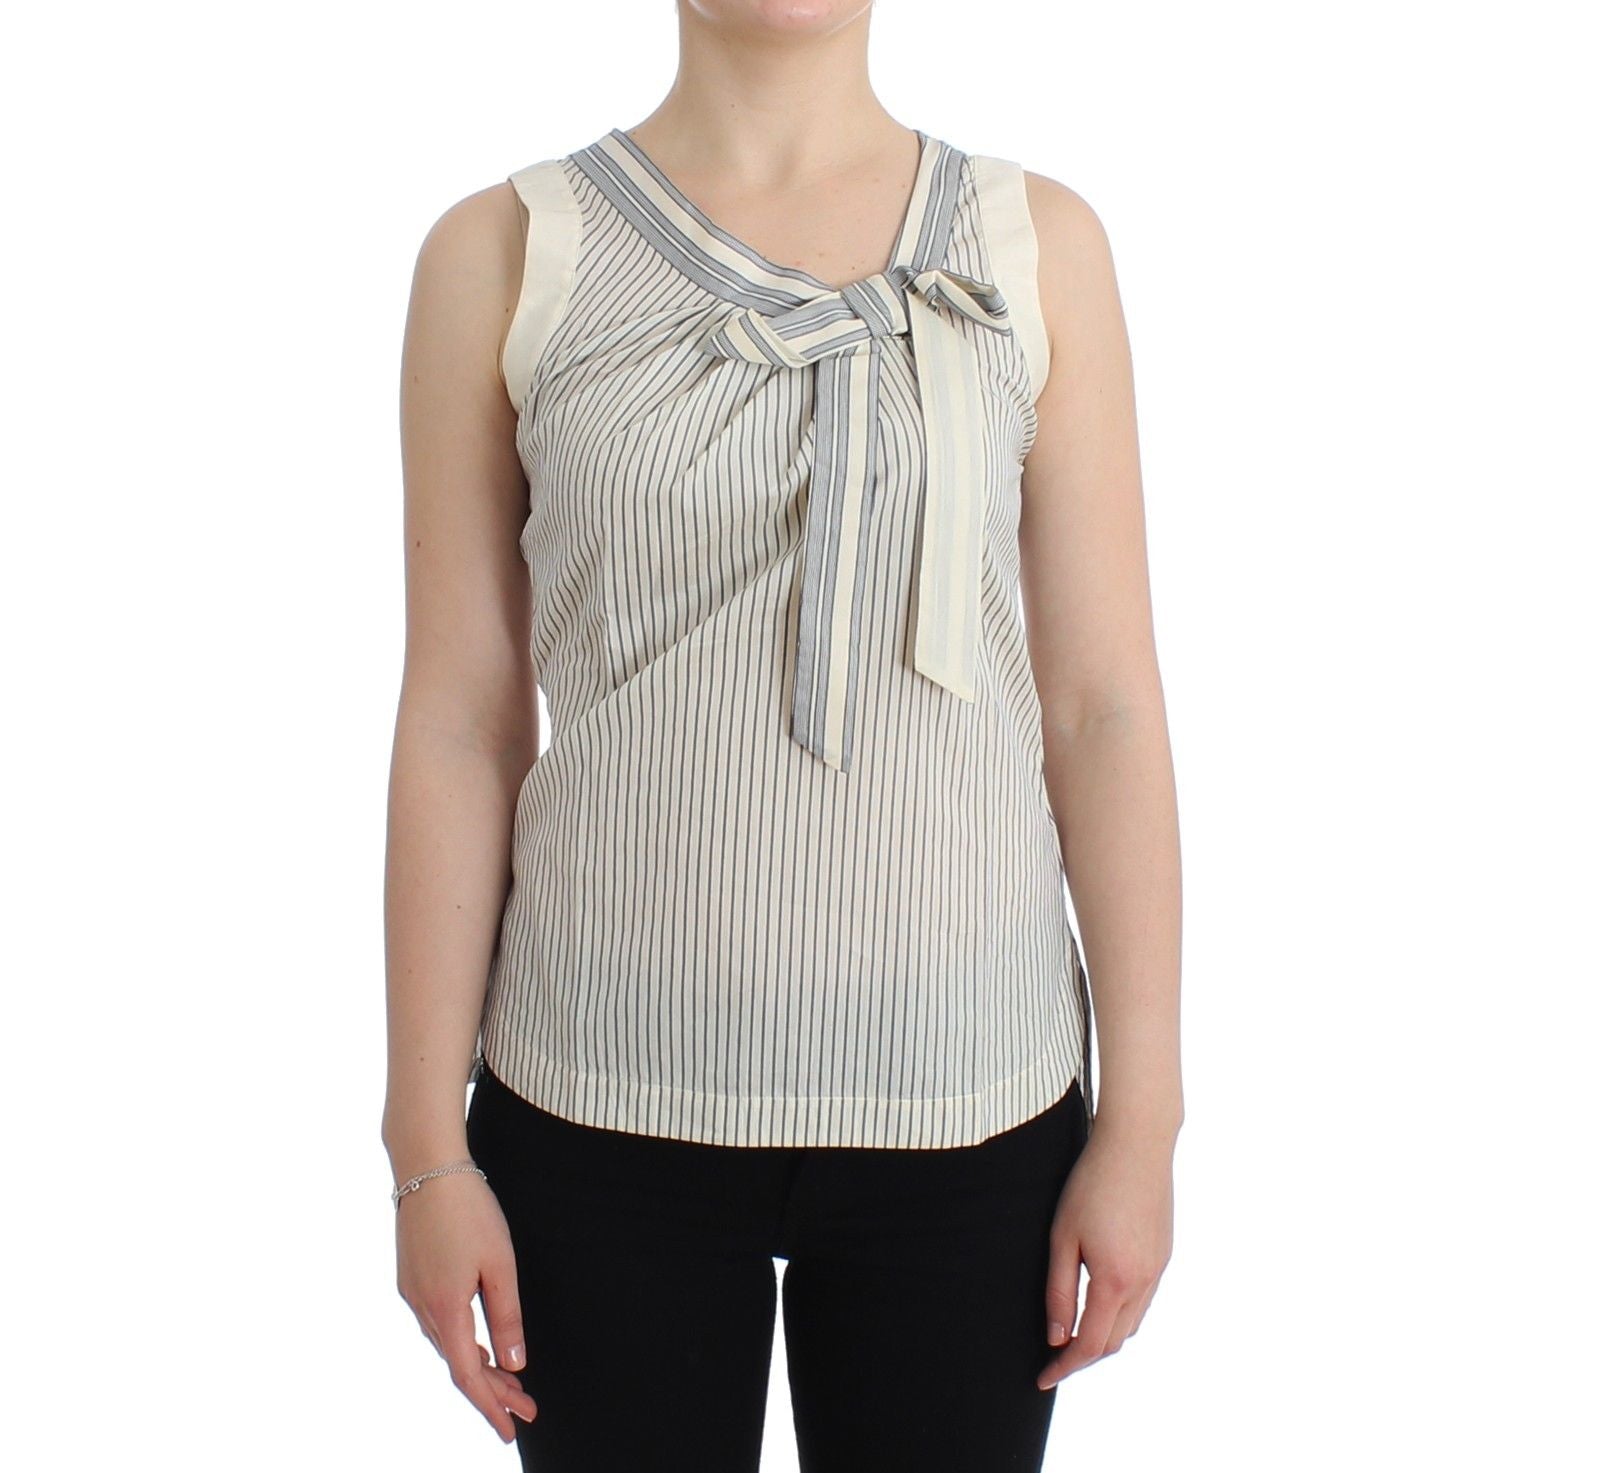 Buy Beachwear Striped Top Blouse Shirt Bow Tank by Ermanno Scervino